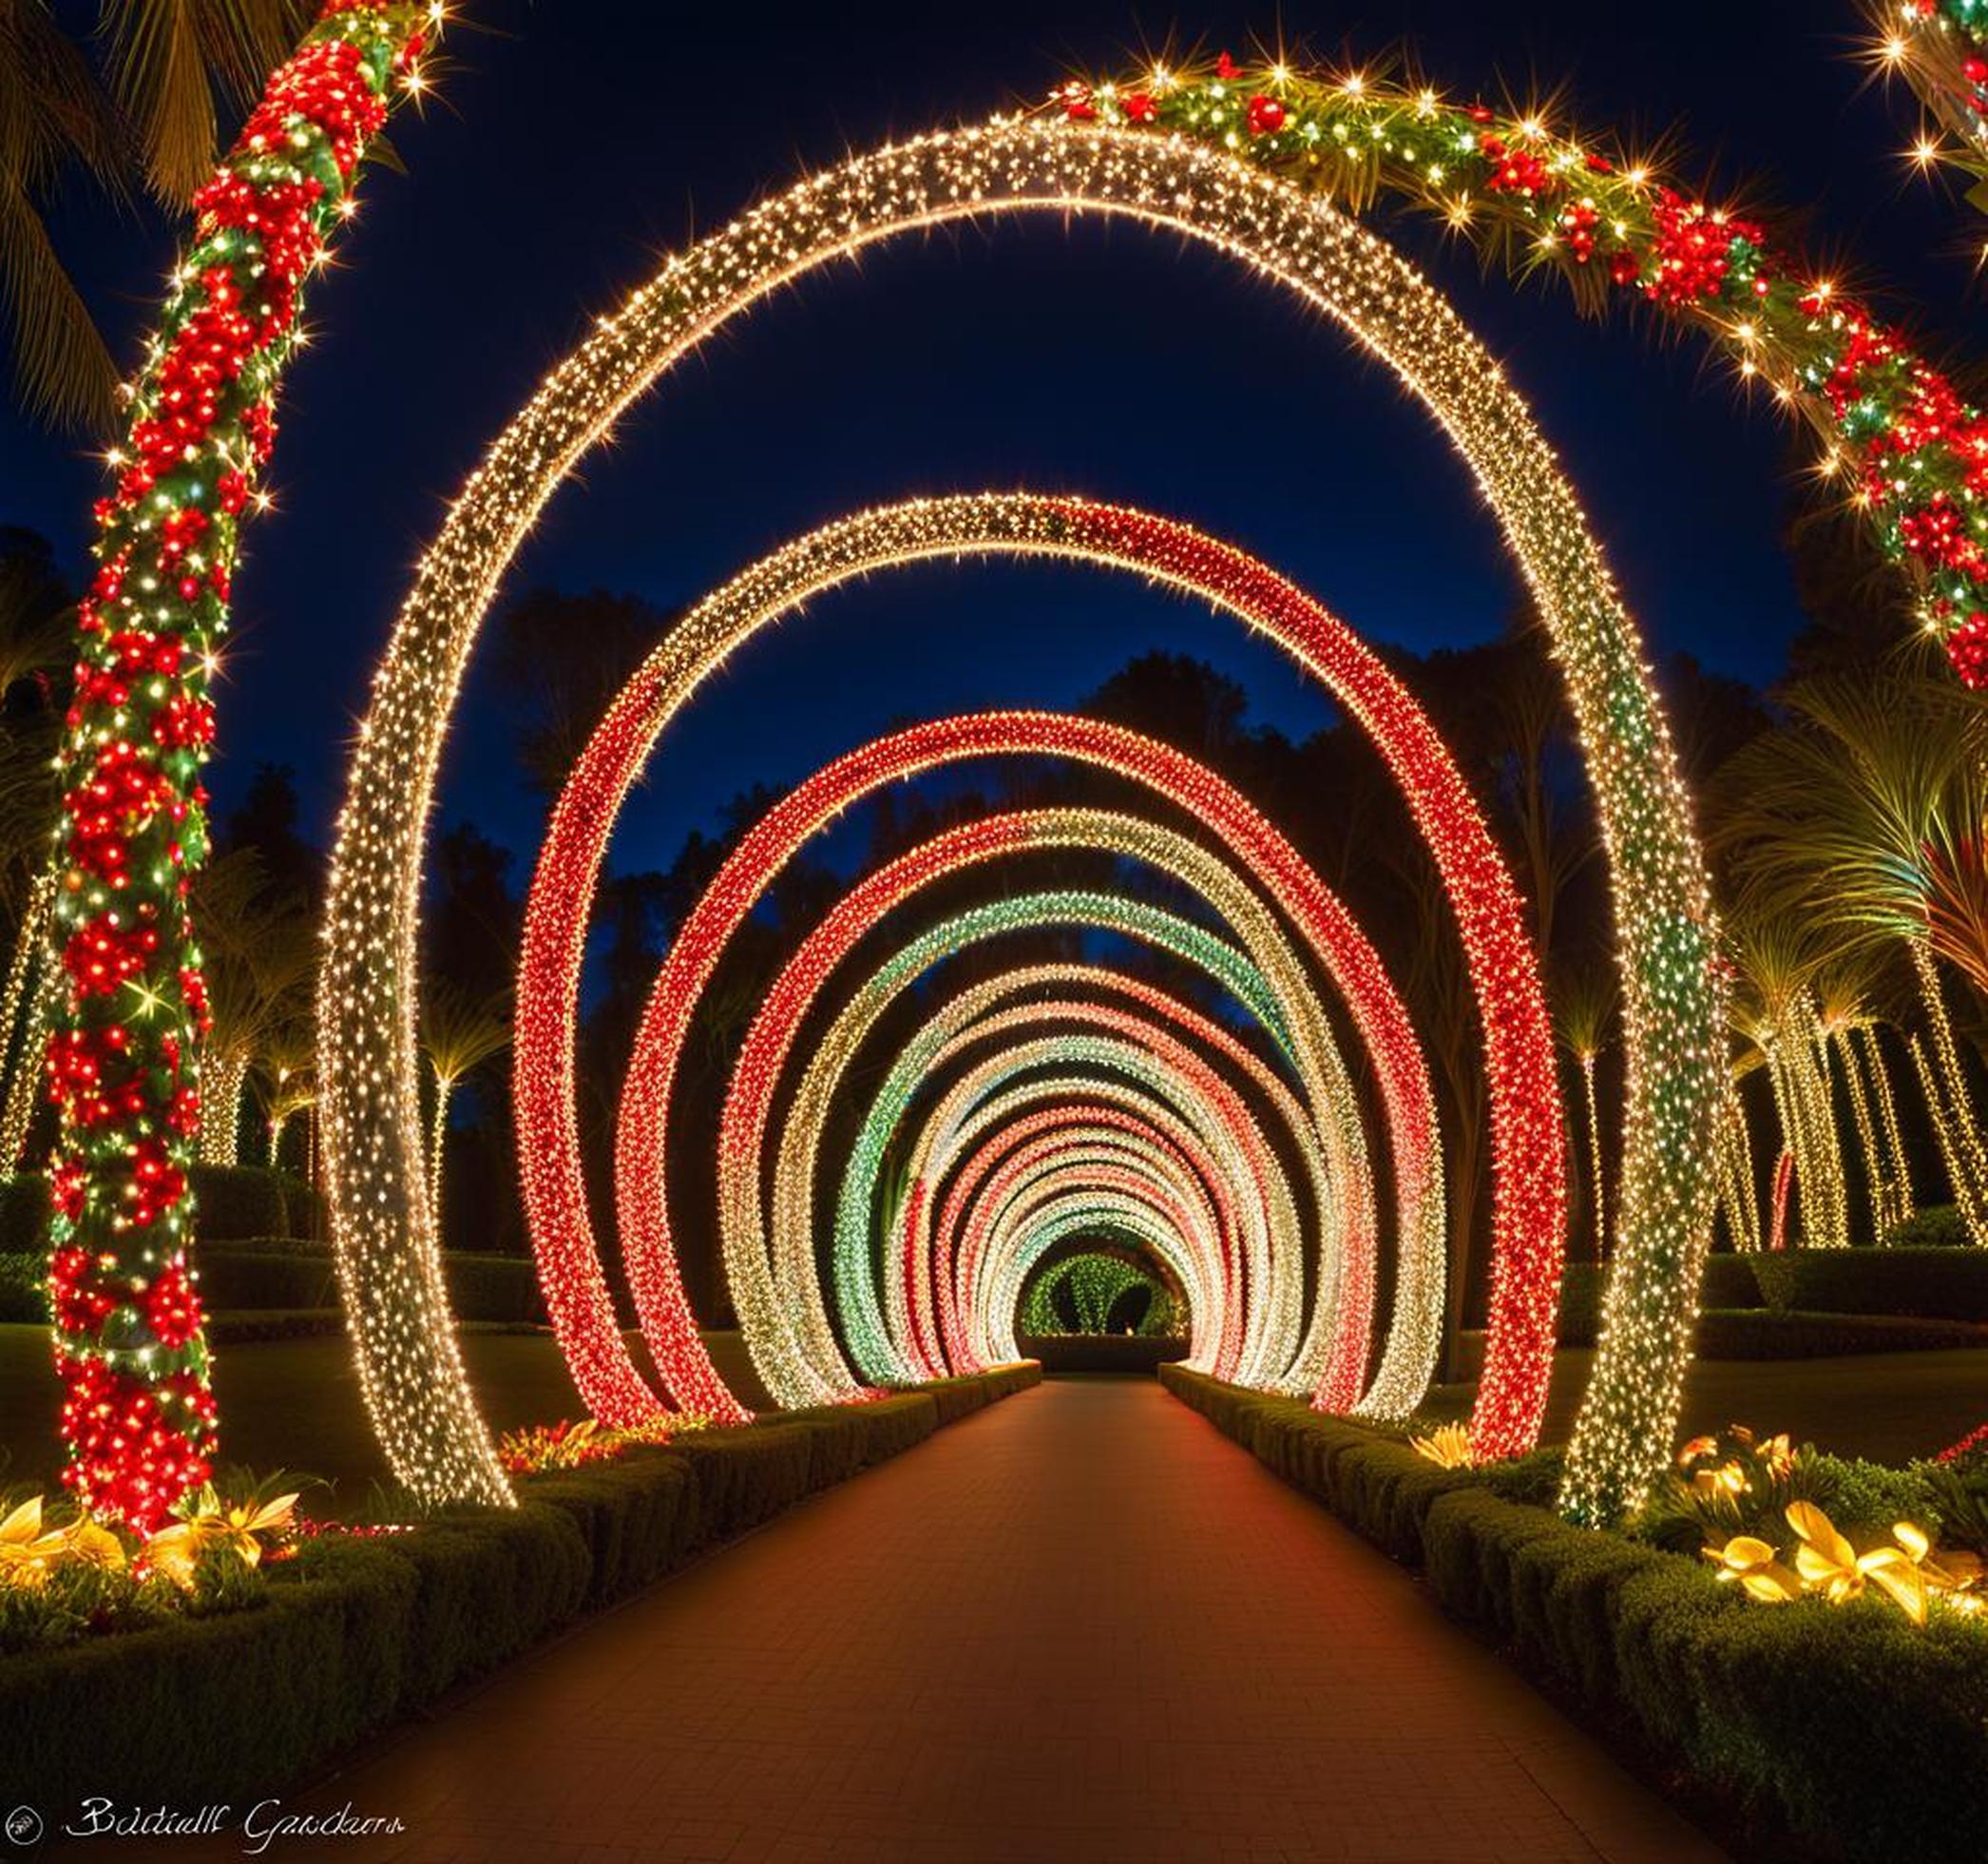 Wind Through Botanical Gardens’ Enchanting Pathways Lined With Shimmering Holiday Lights